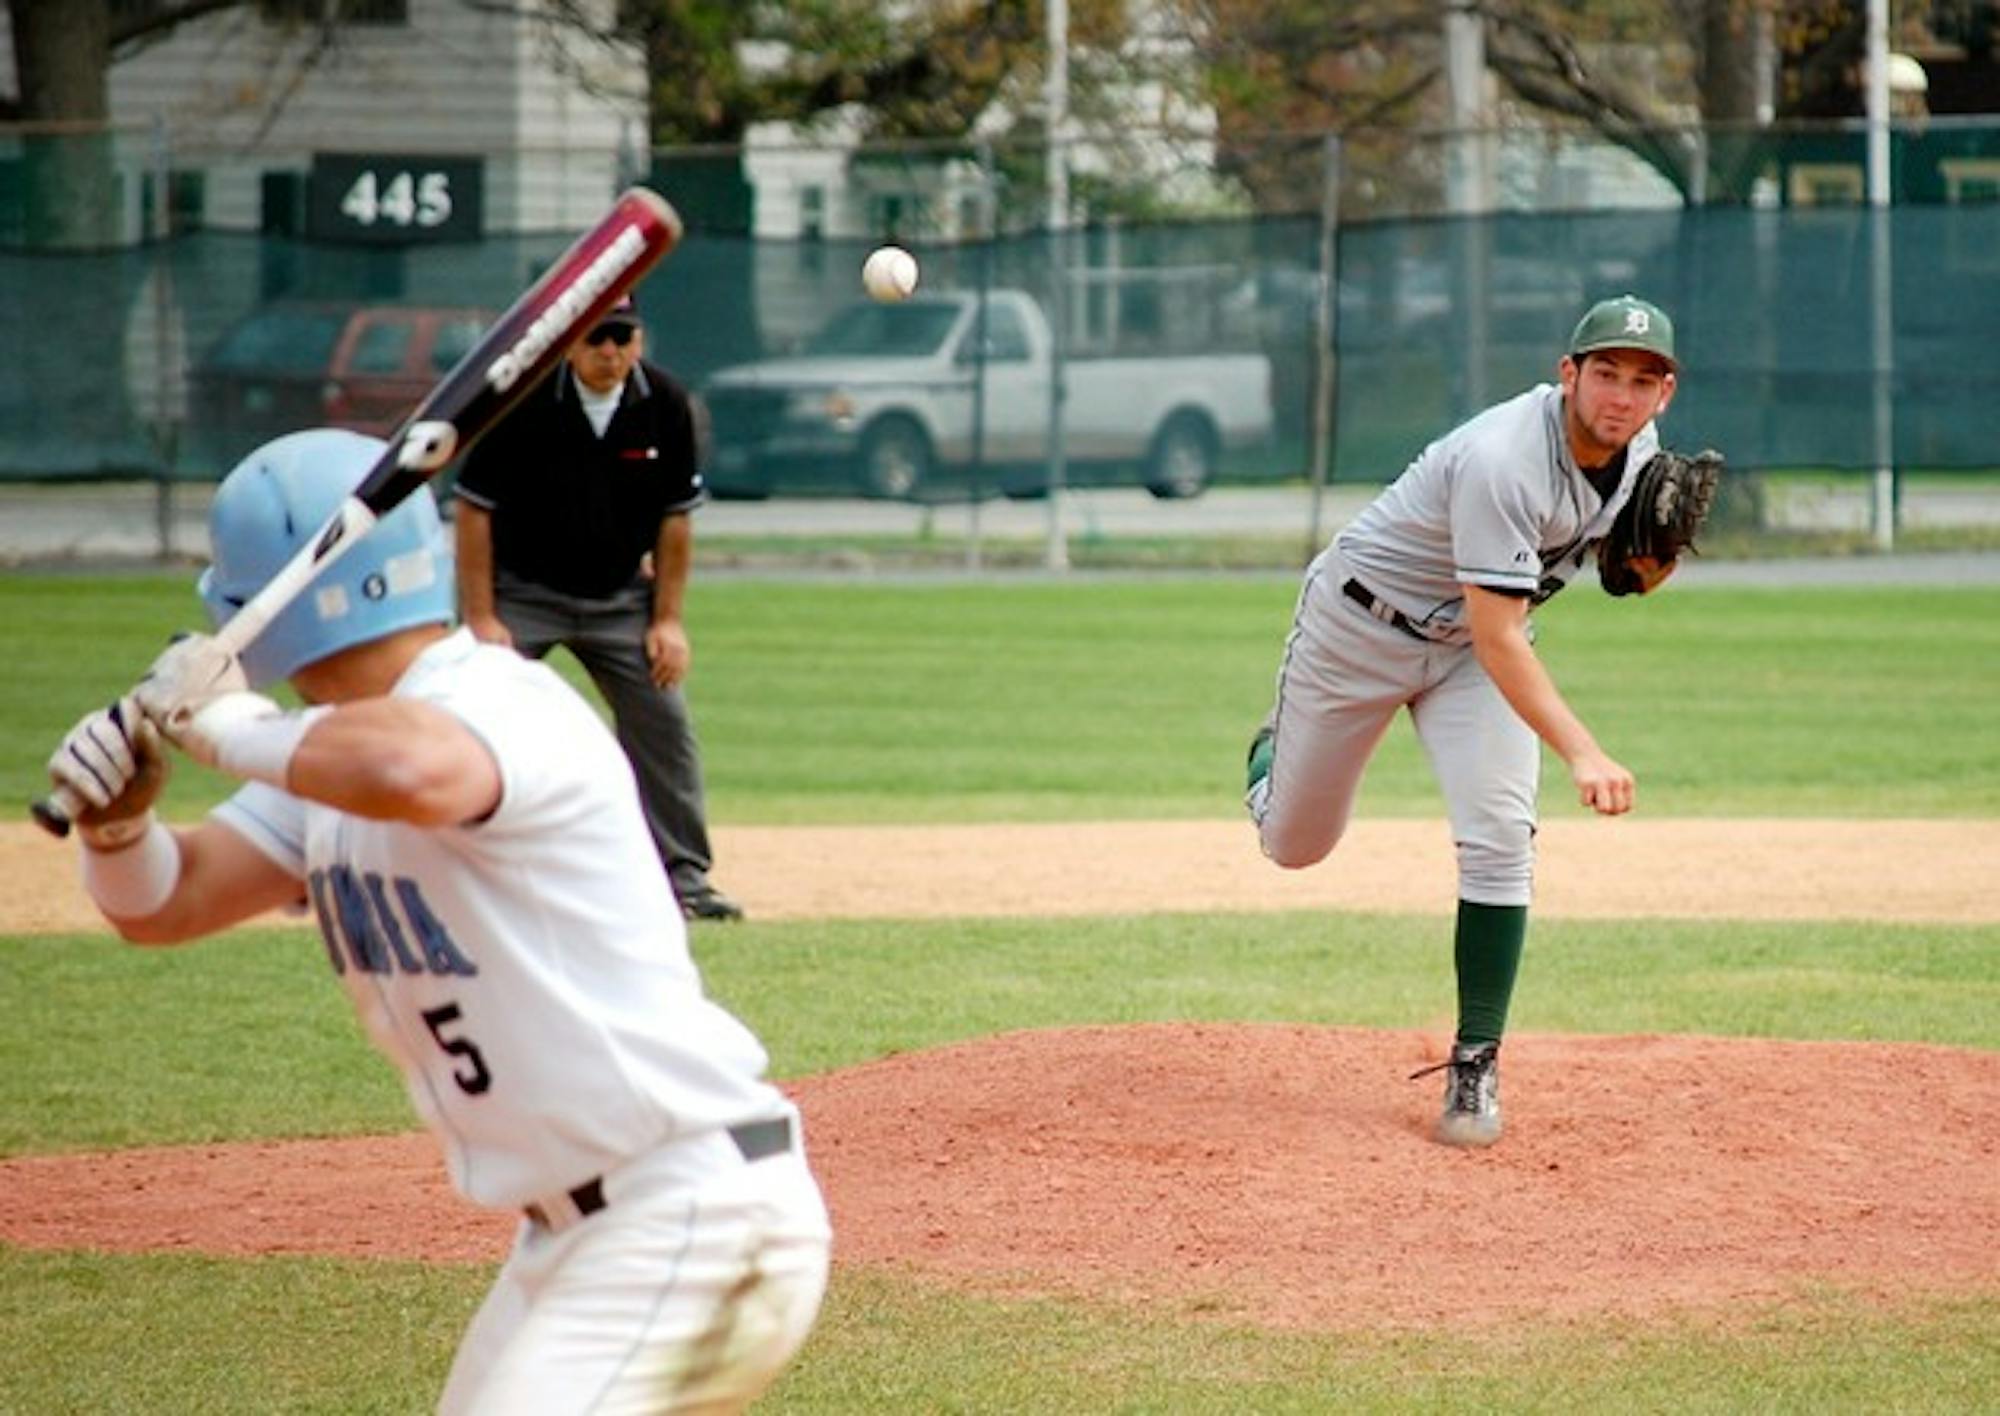 Jake Pruner '11 and Ryan Smith '11 held Columbia to a series-low seven runs on 10 hits to keep the Big Green in the game, but Dartmouth did not have the offensive support to win game three on Wednesday.